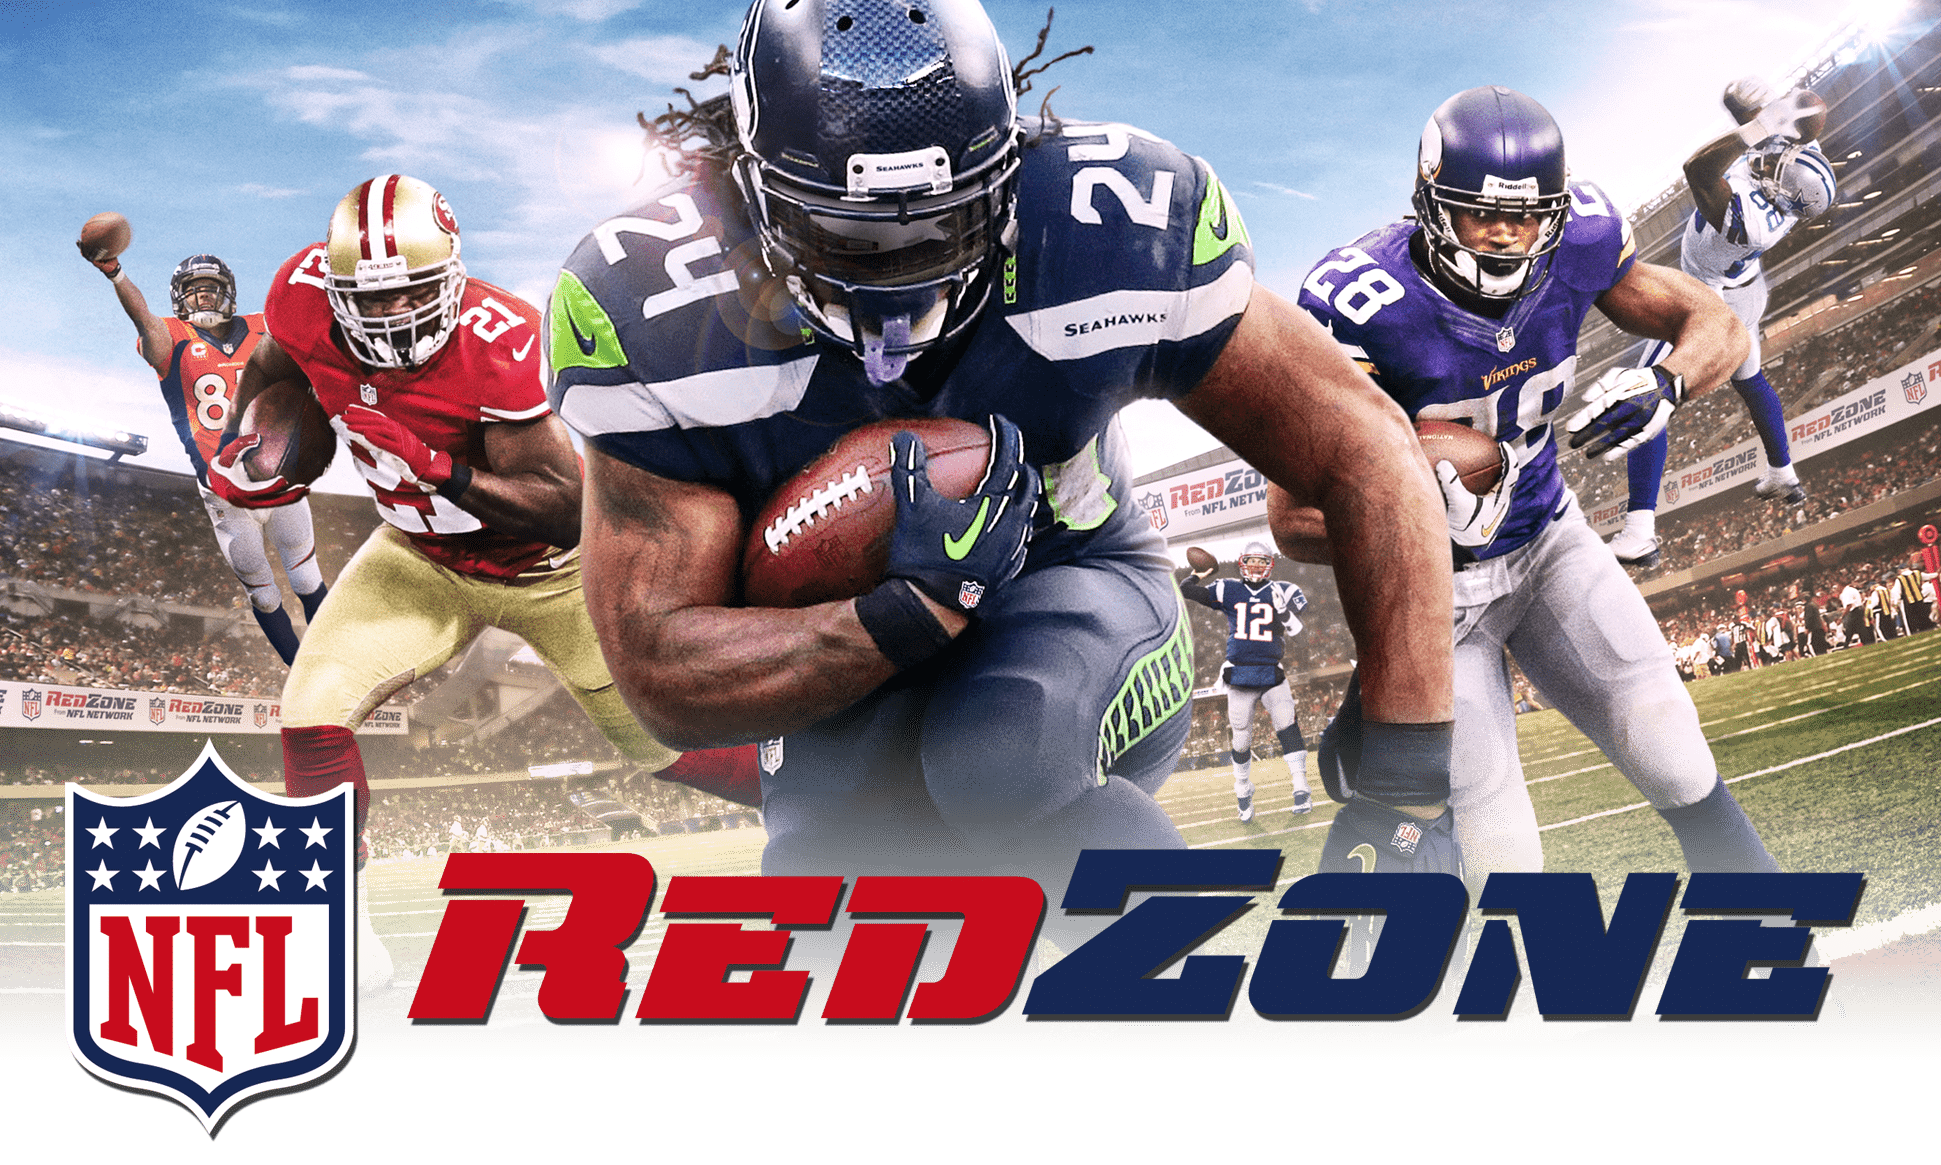 NFL's RedZone channel will be available for streaming. But it's